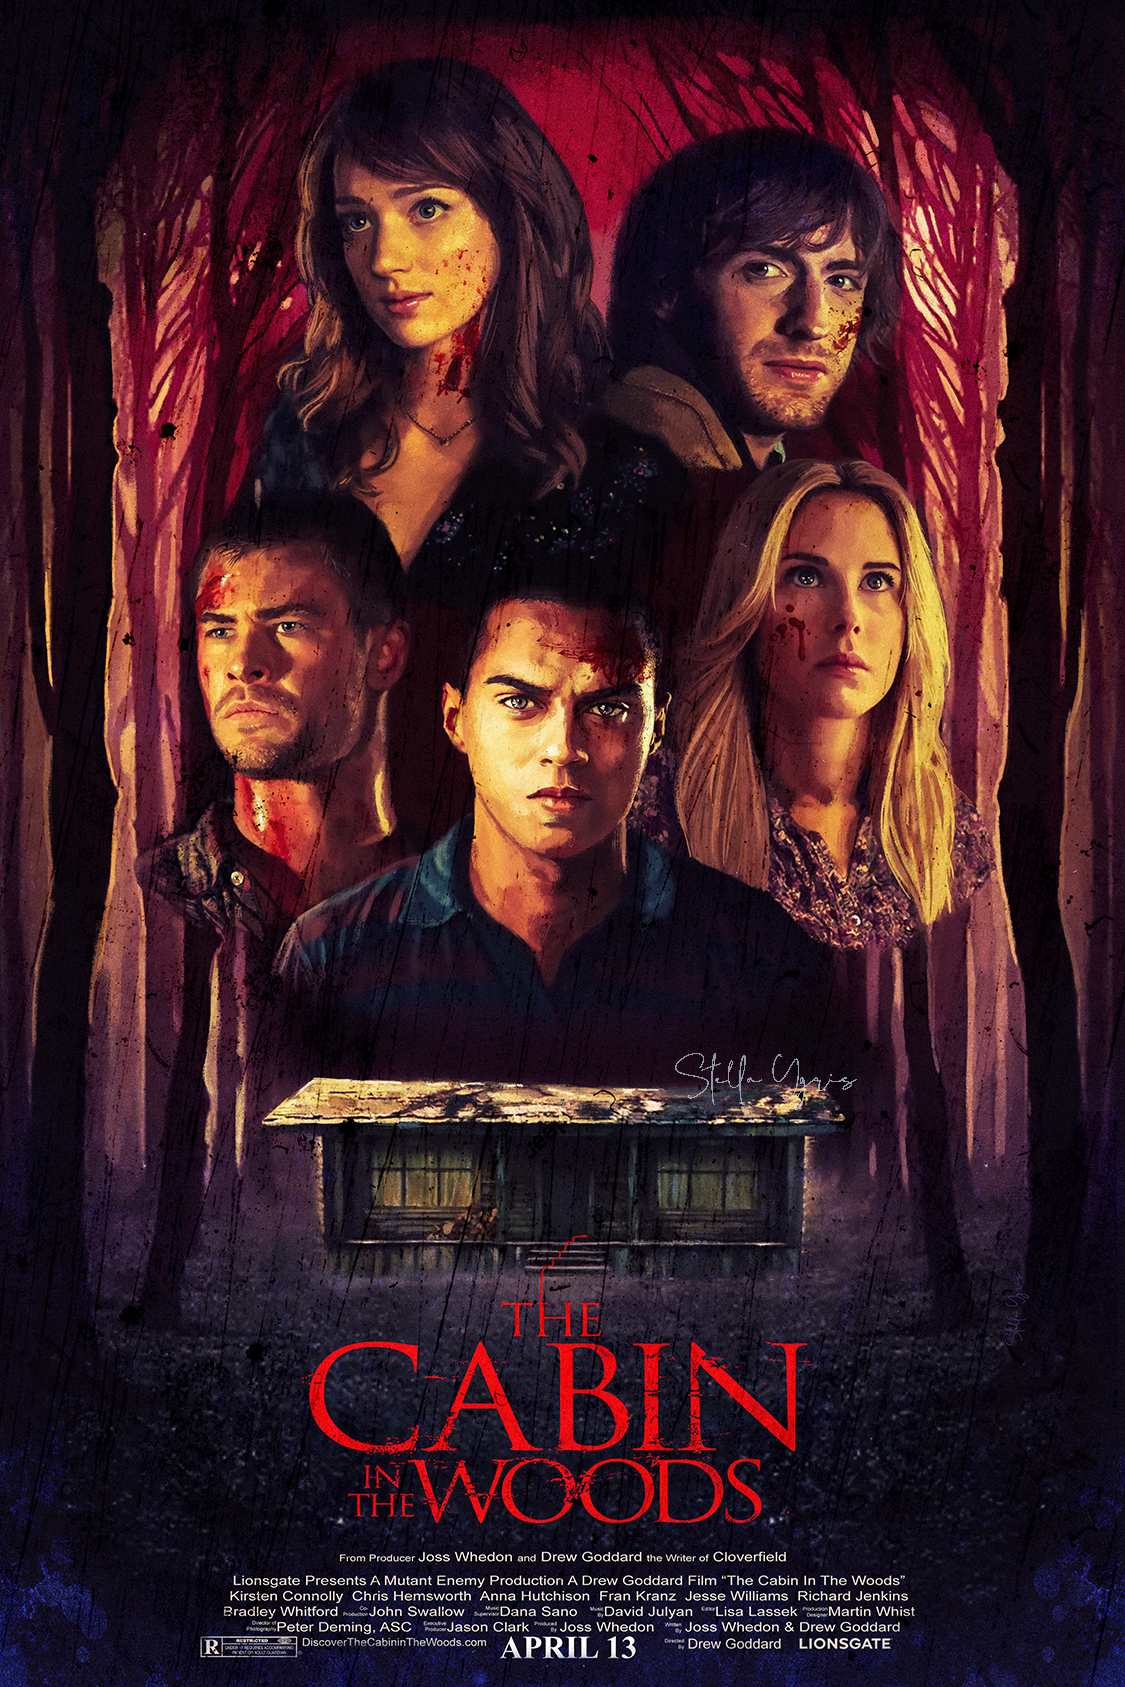 The cabin in the woods